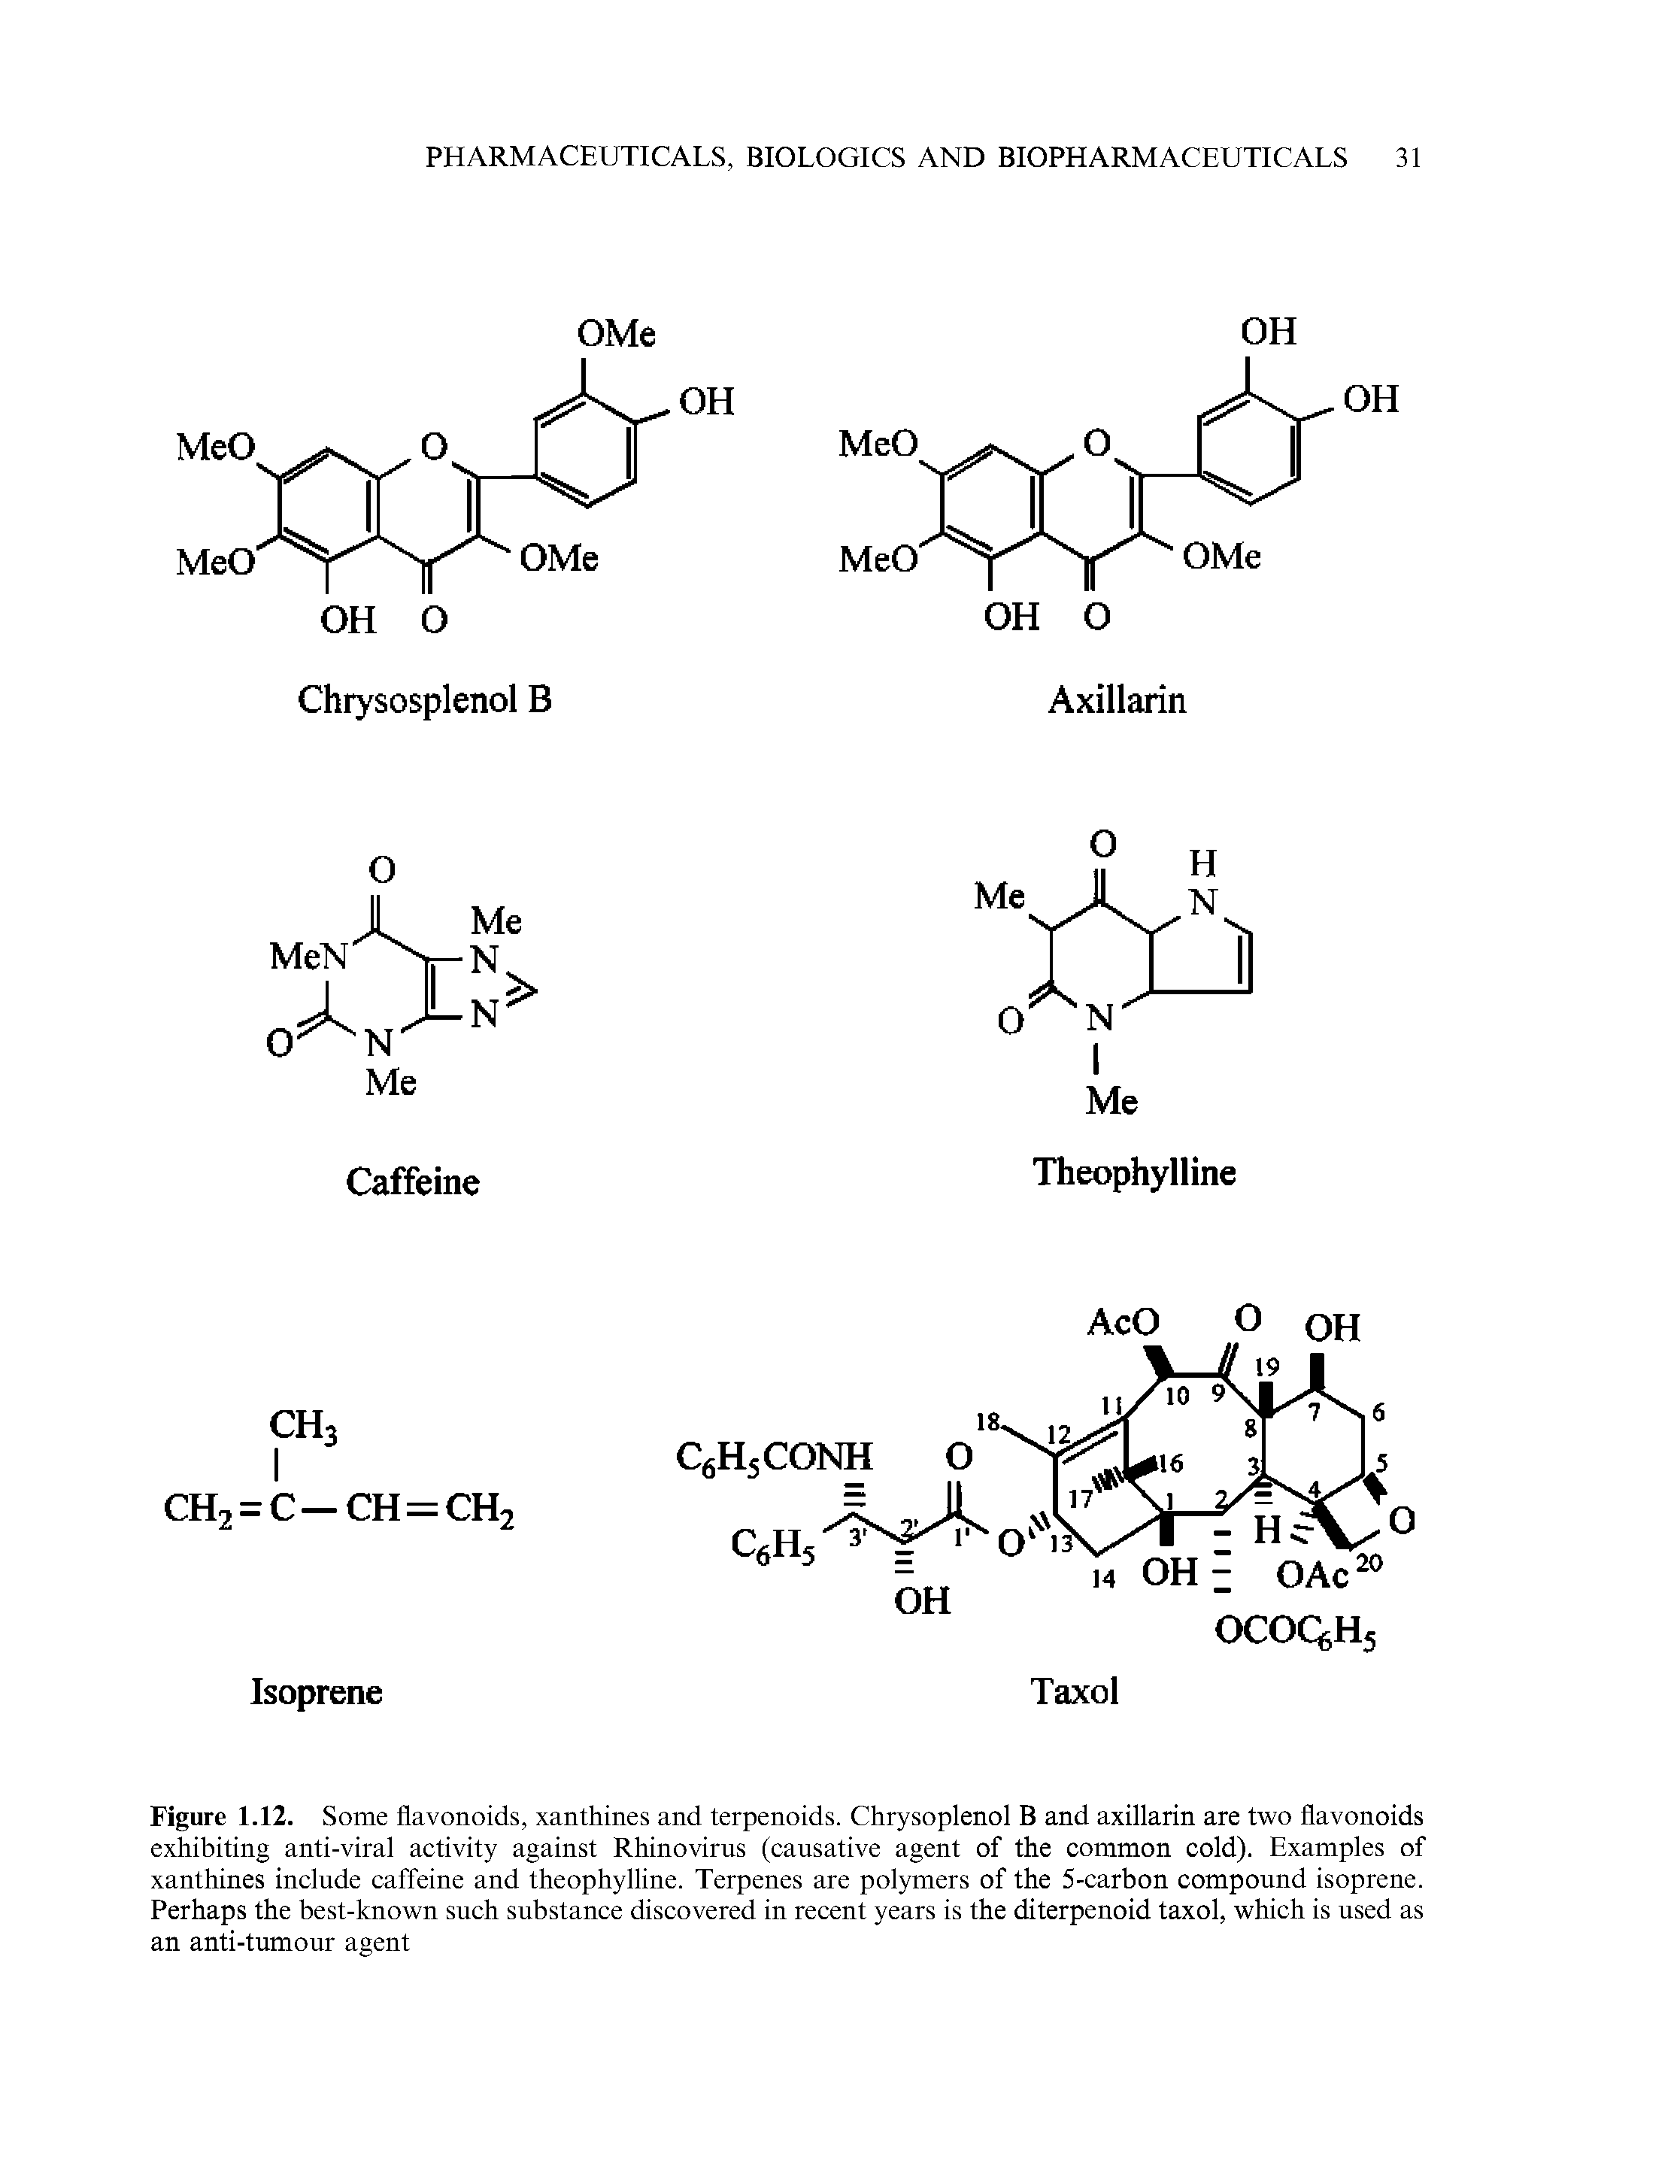 Figure 1.12. Some flavonoids, xanthines and terpenoids. Chrysoplenol B and axillarin are two flavonoids exhibiting anti-viral activity against Rhinovirus (causative agent of the common cold). Examples of xanthines include caffeine and theophylline. Terpenes are polymers of the 5-carbon compound isoprene. Perhaps the best-known such substance discovered in recent years is the diterpenoid taxol, which is used as an anti-tumour agent...